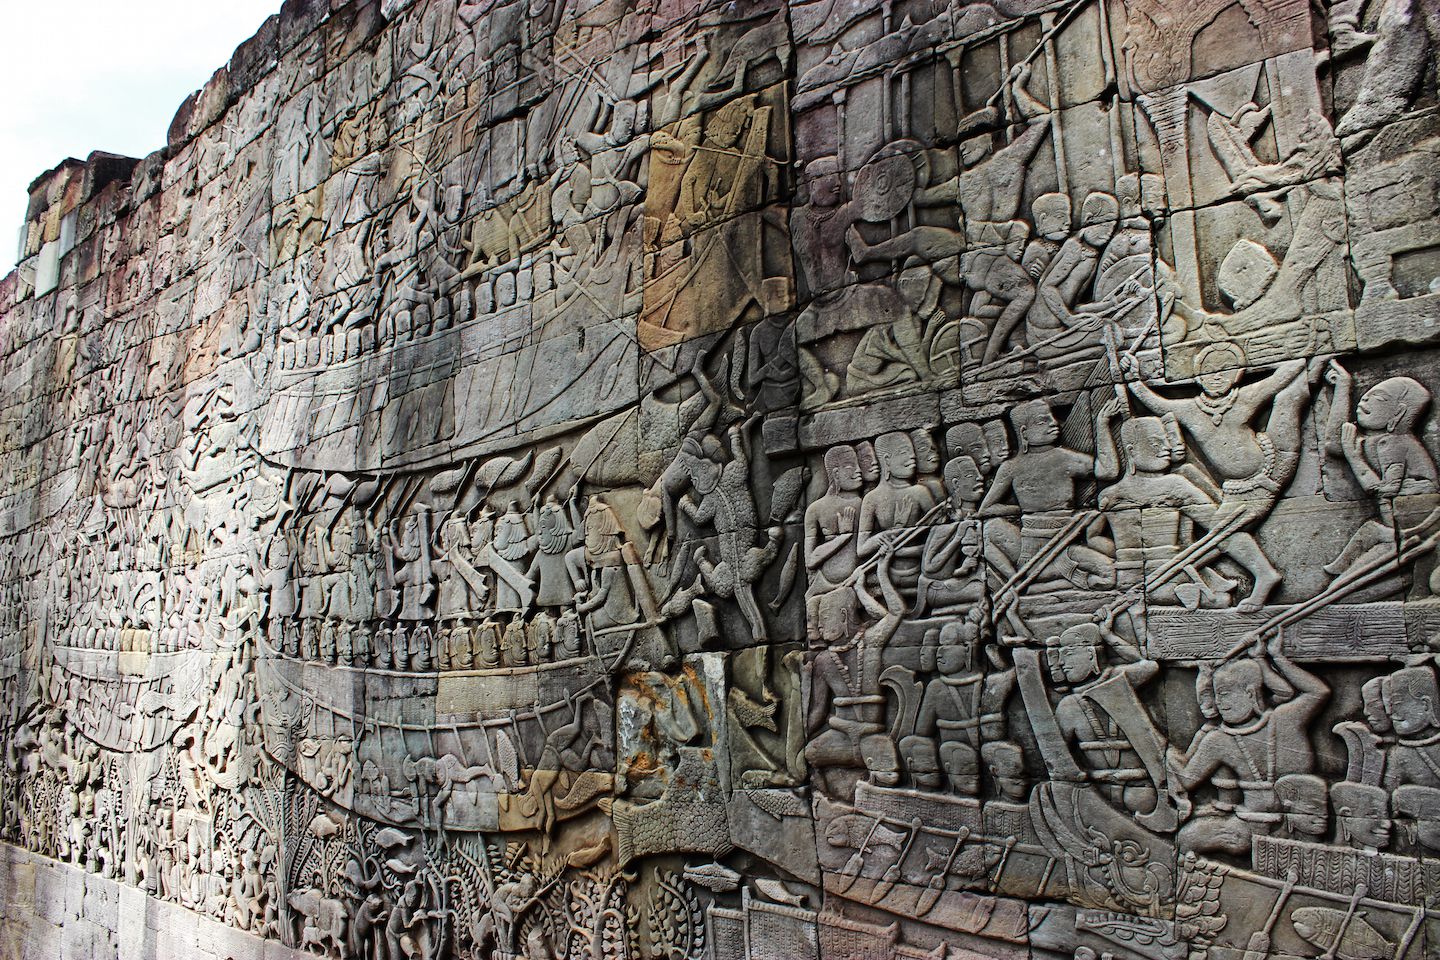 Bas relief at the Bayong depicting the naval battle against the Chams